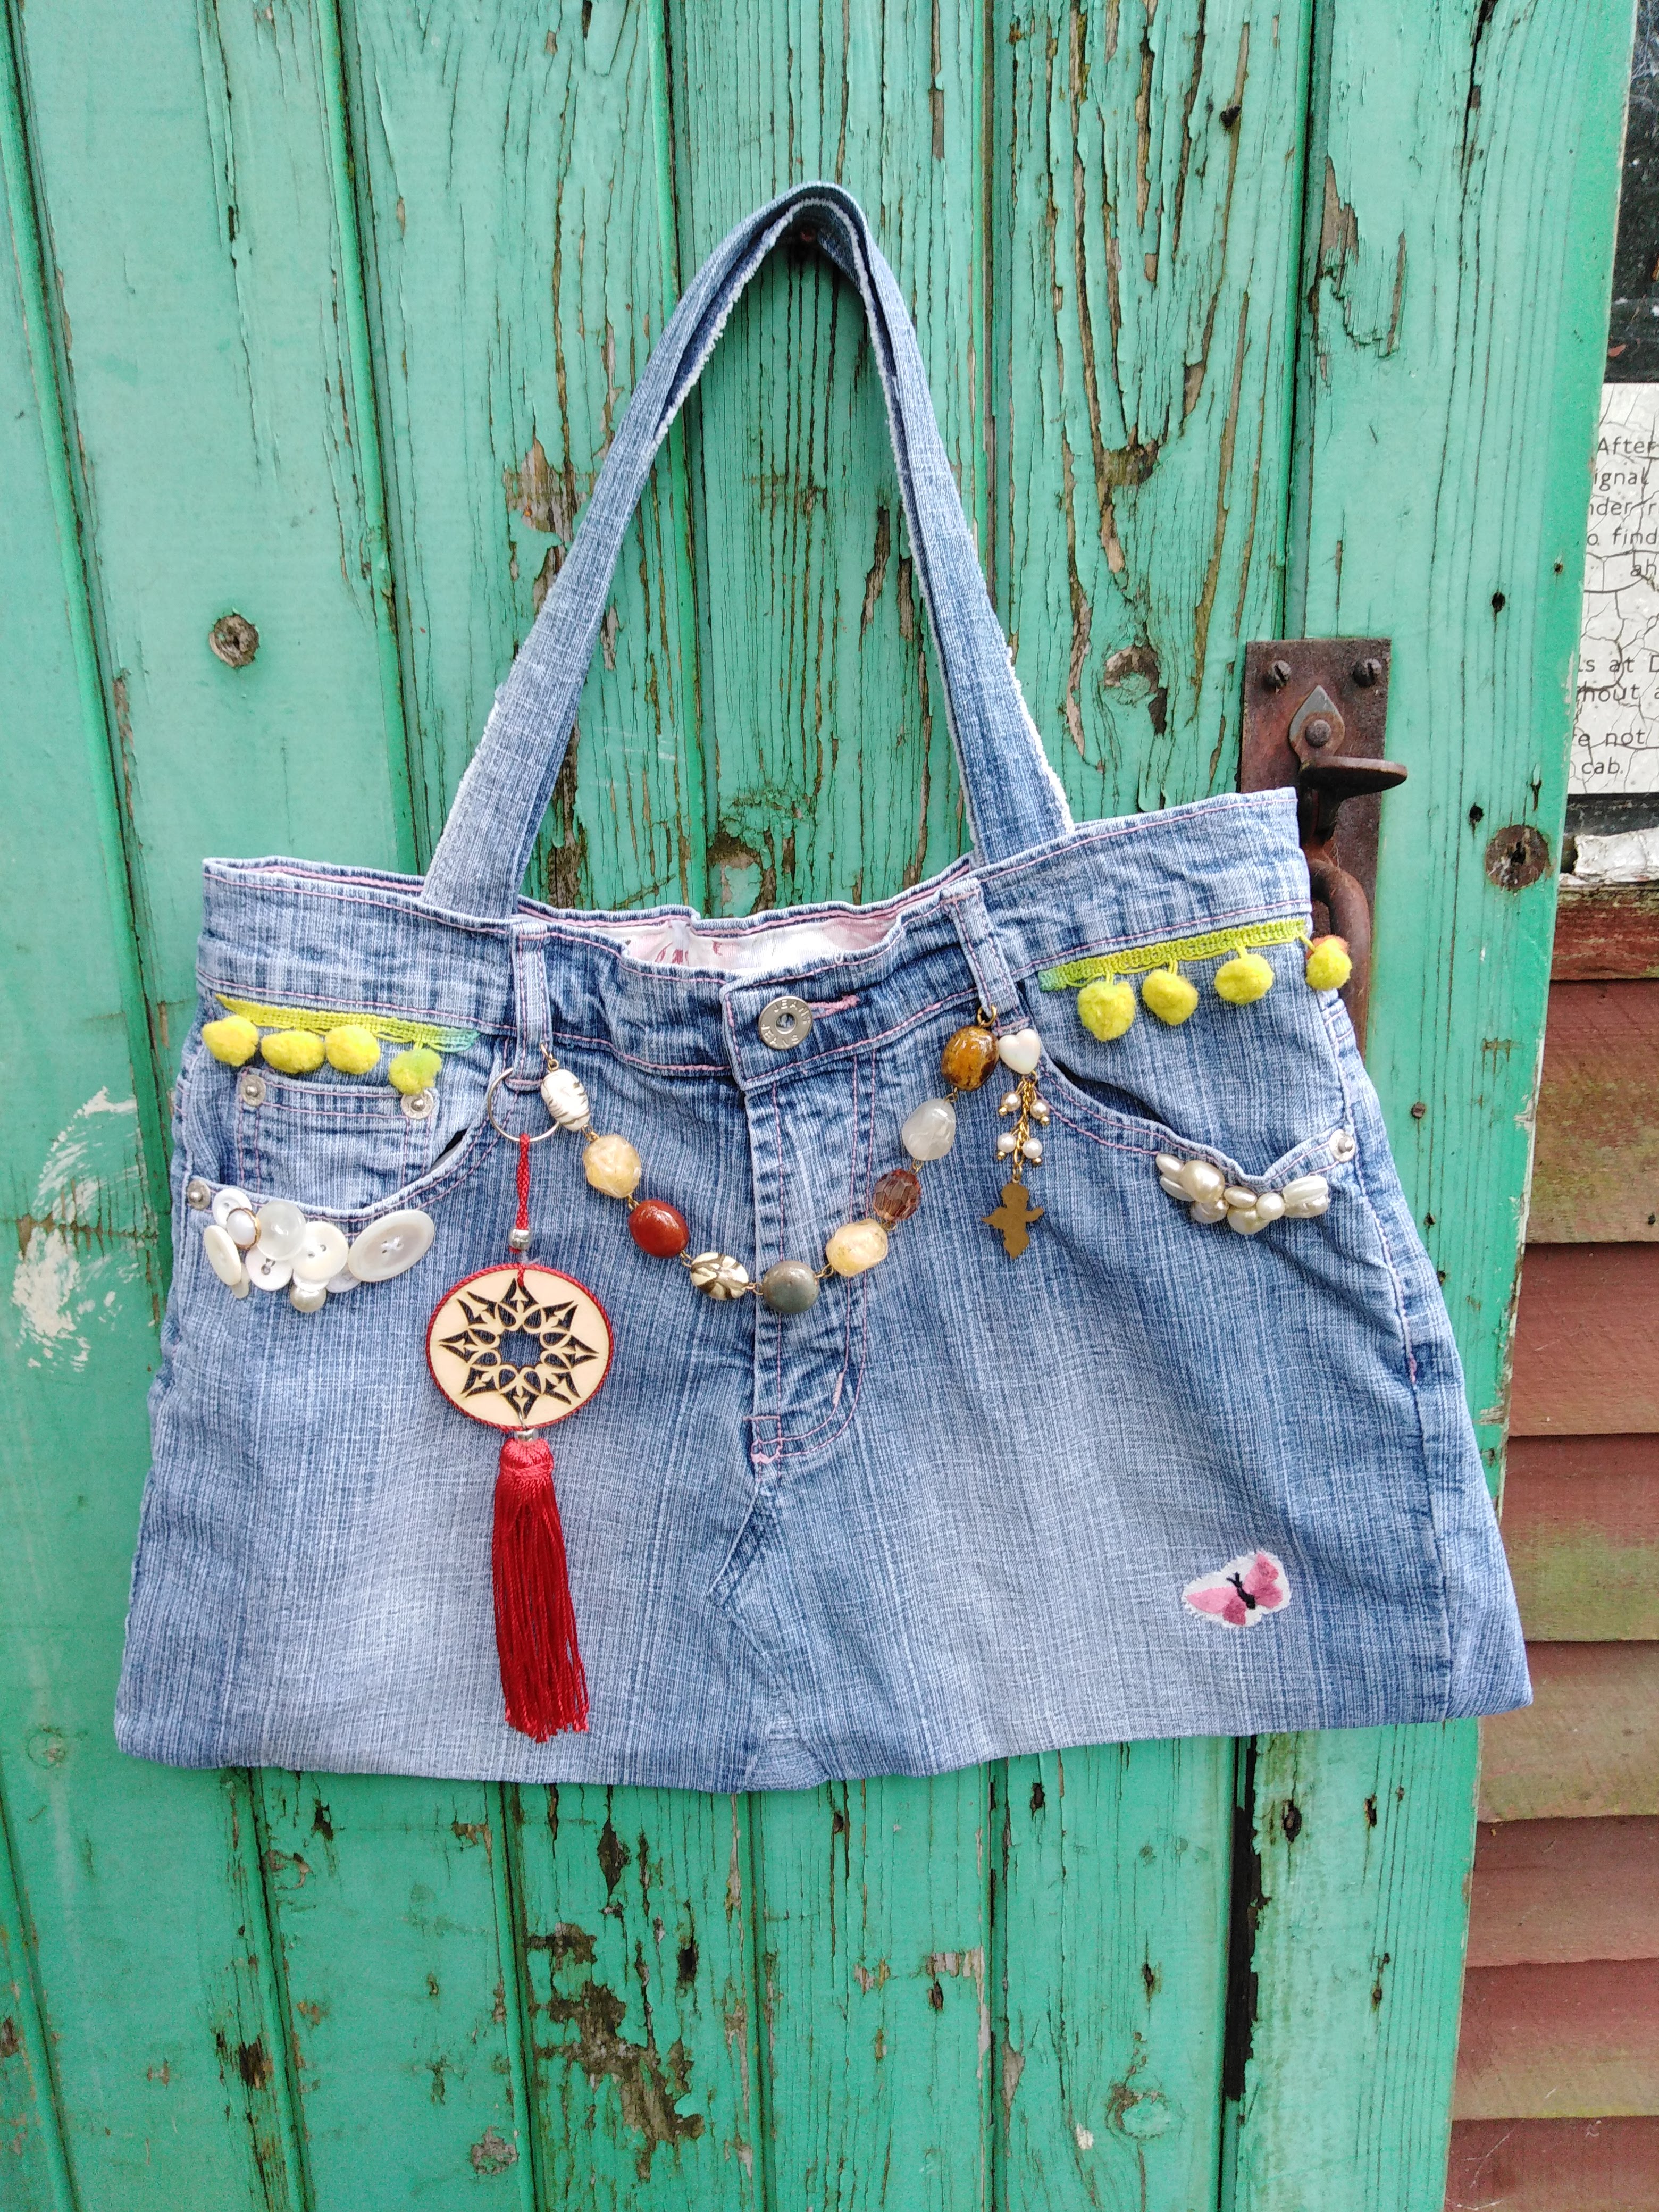 Blue Convertible Tote Bag | Upcycled Handcrafted Denim Jeans | dwij